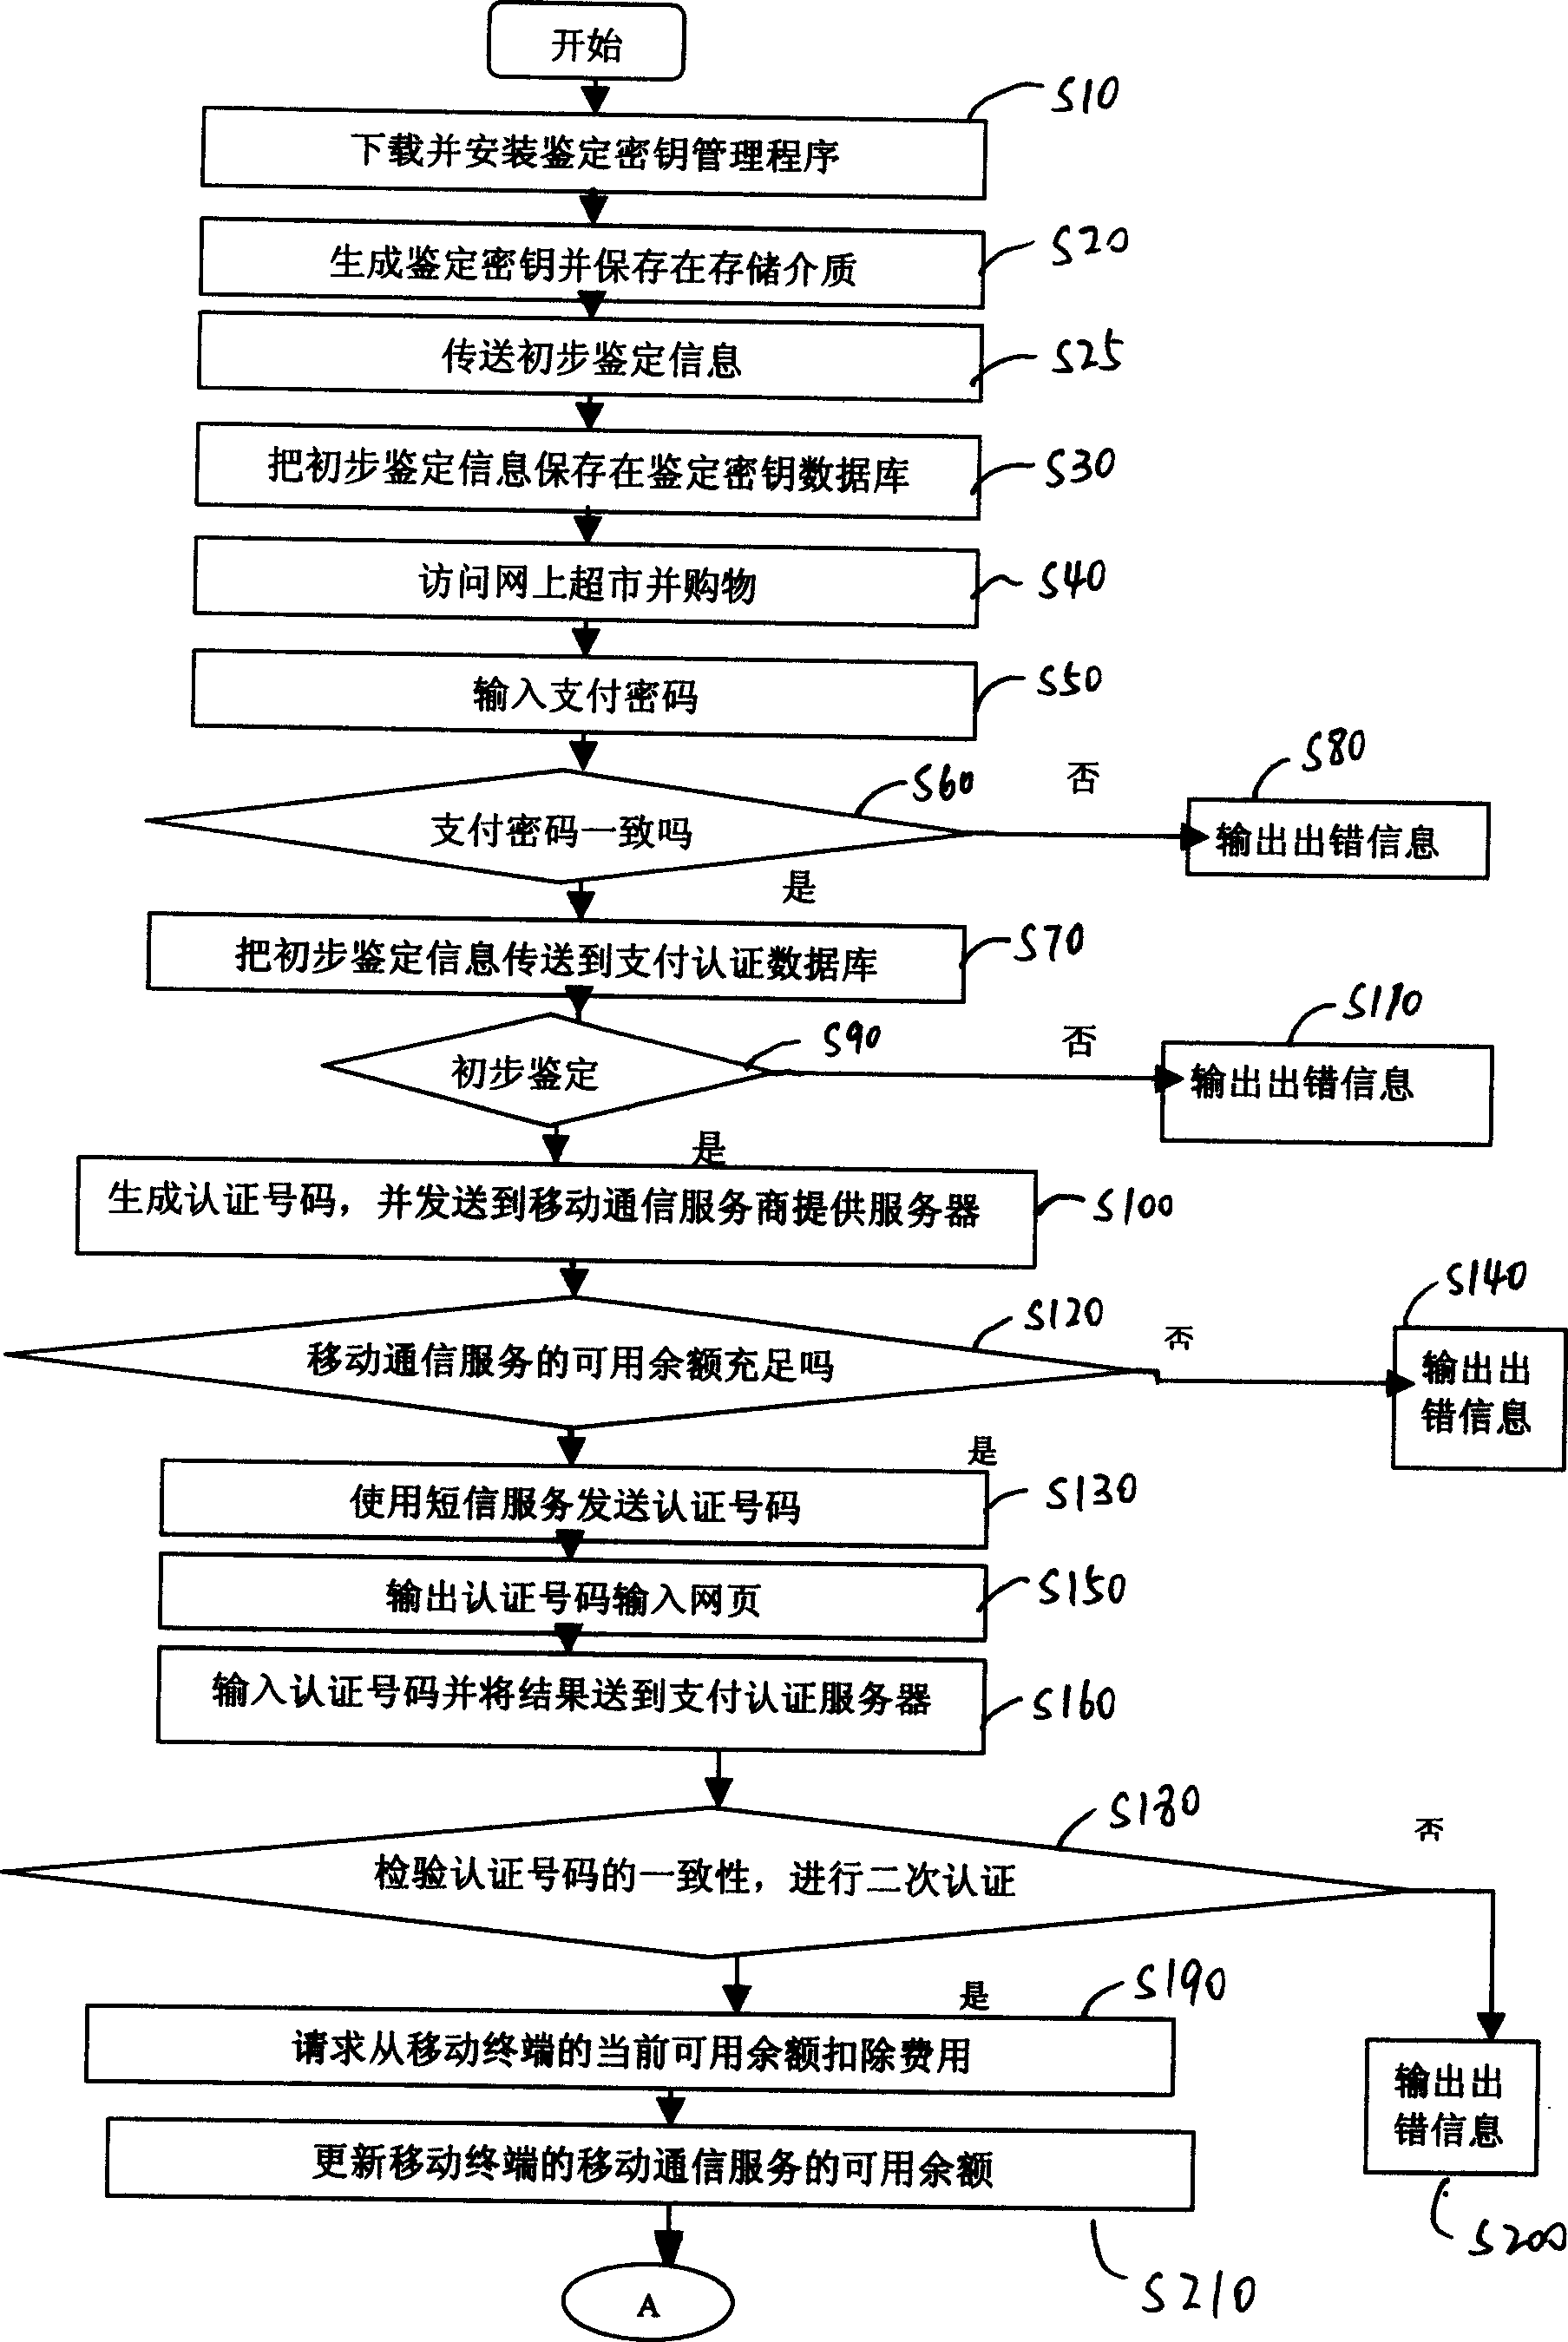 Recognition method for electronic payment by short message service